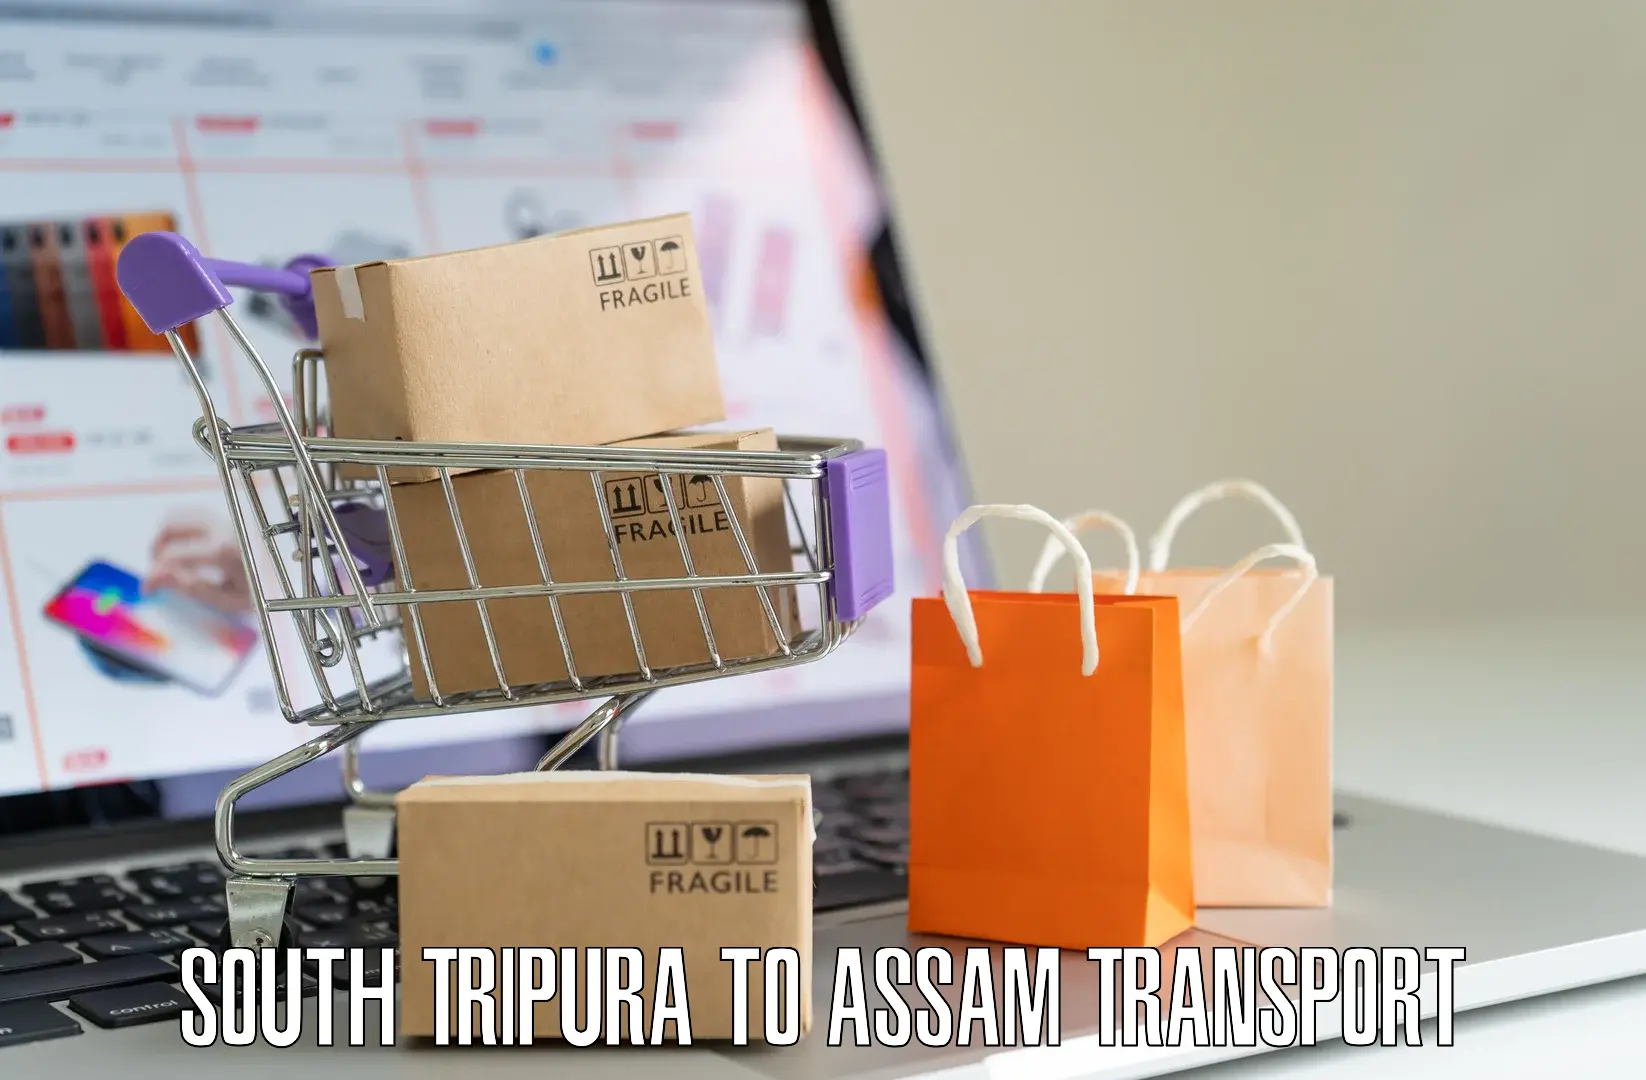 Transport bike from one state to another South Tripura to Sivasagar